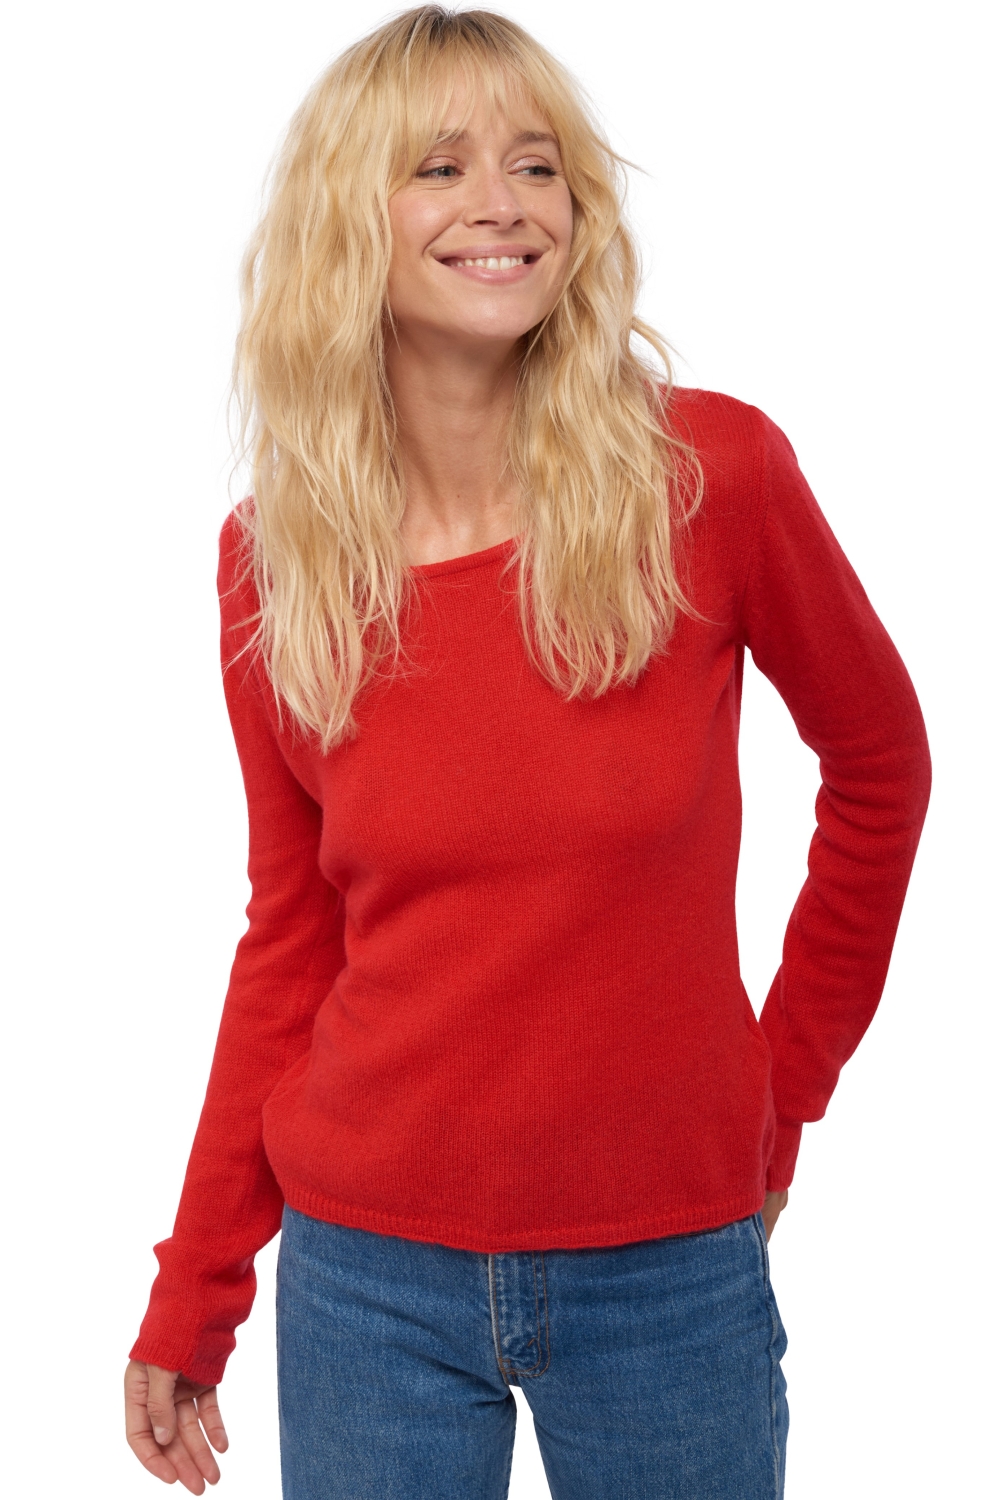 Cashmere ladies basic sweaters at low prices caleen rouge 4xl